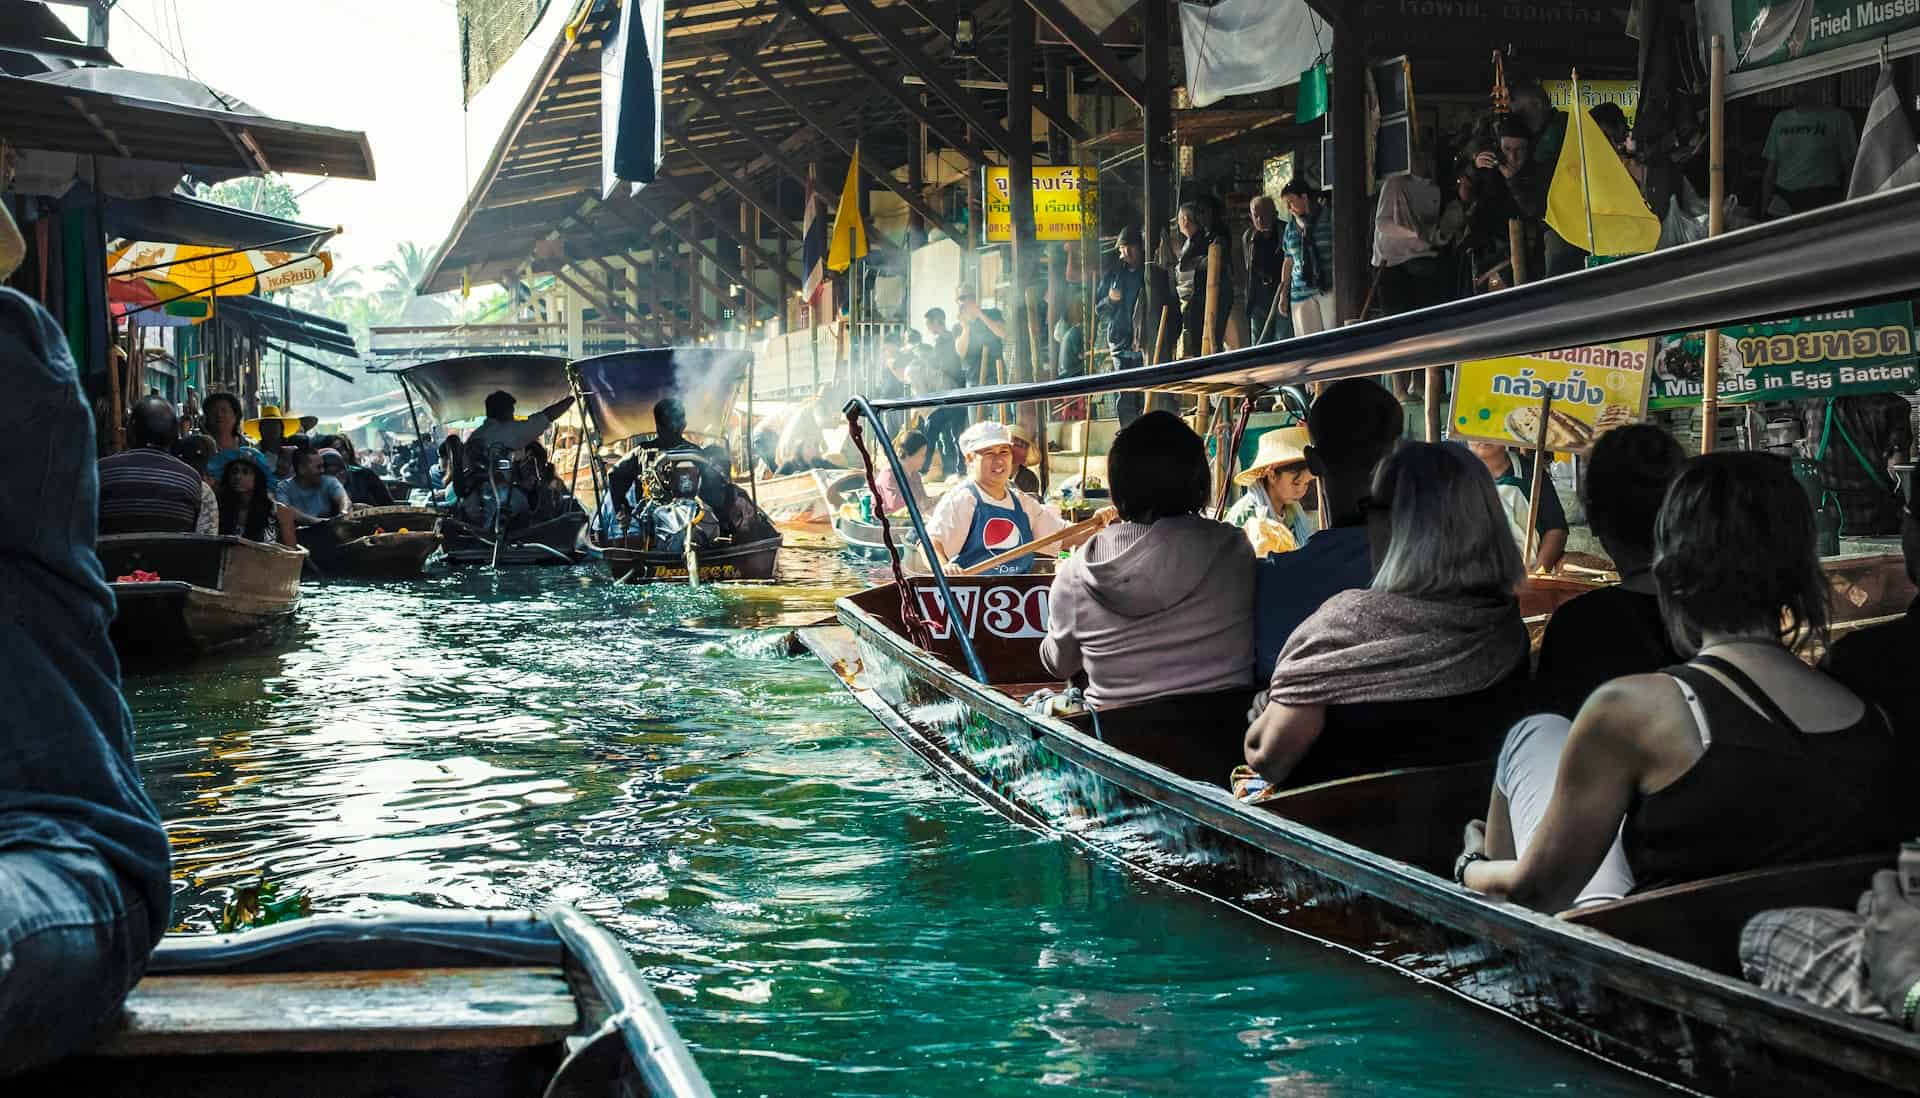 People in boats going through the Floating Market in Thailand.